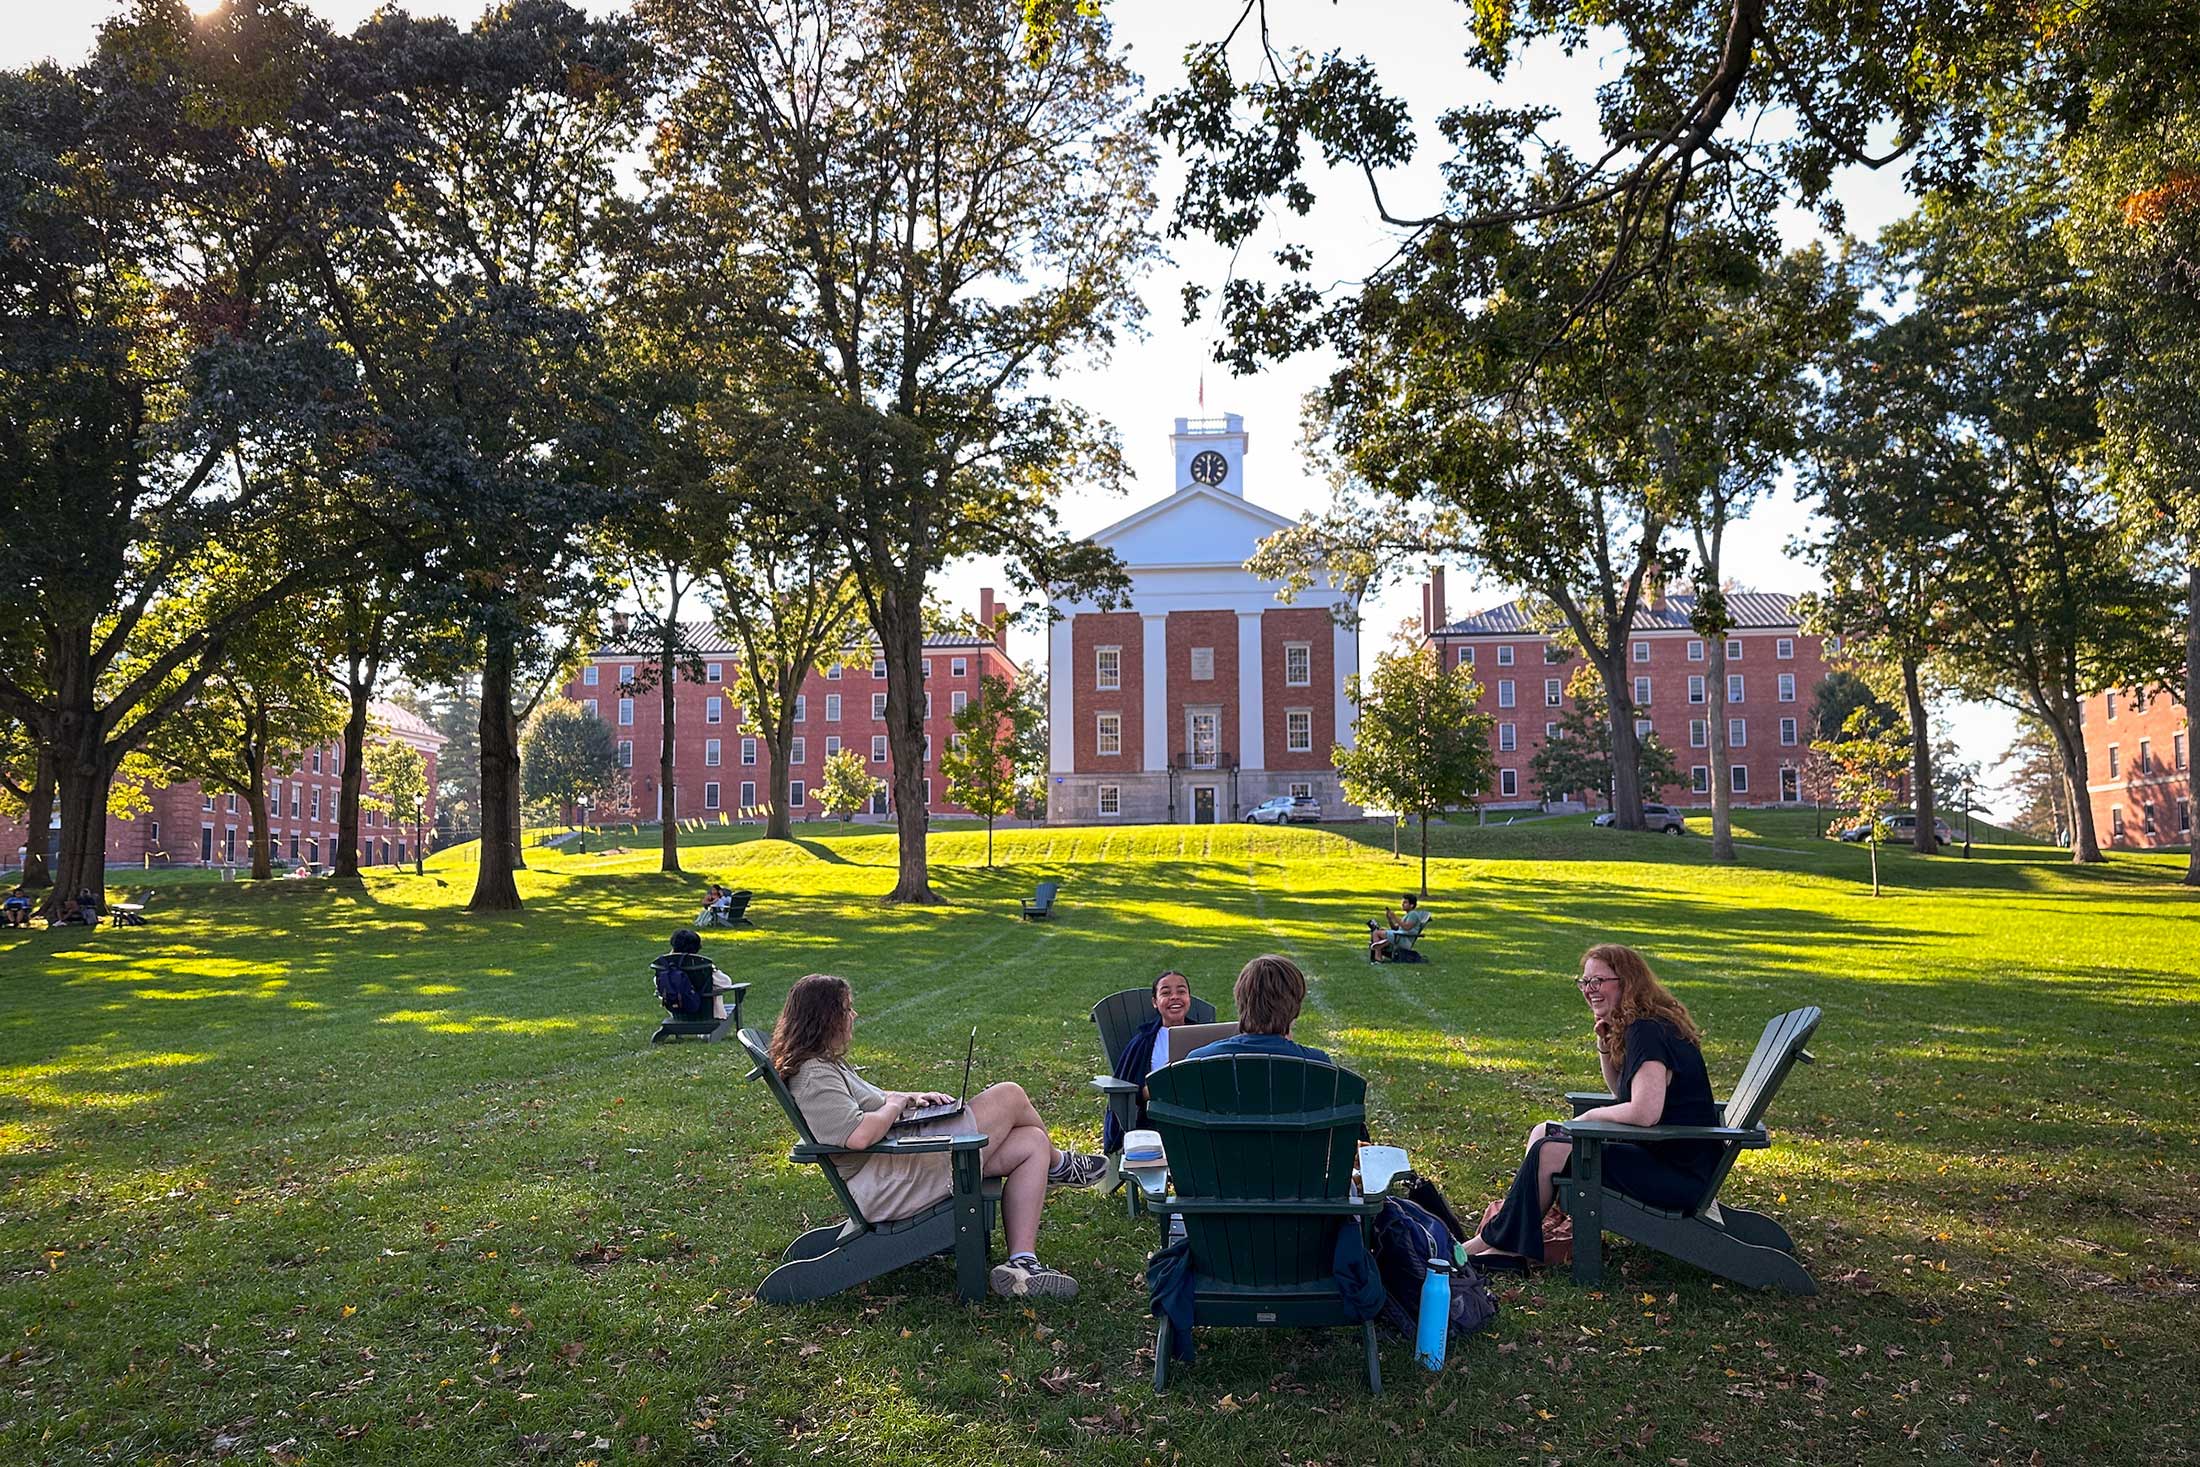 Four people sitting in Adirondack chairs on the Academic Quad in conversation.